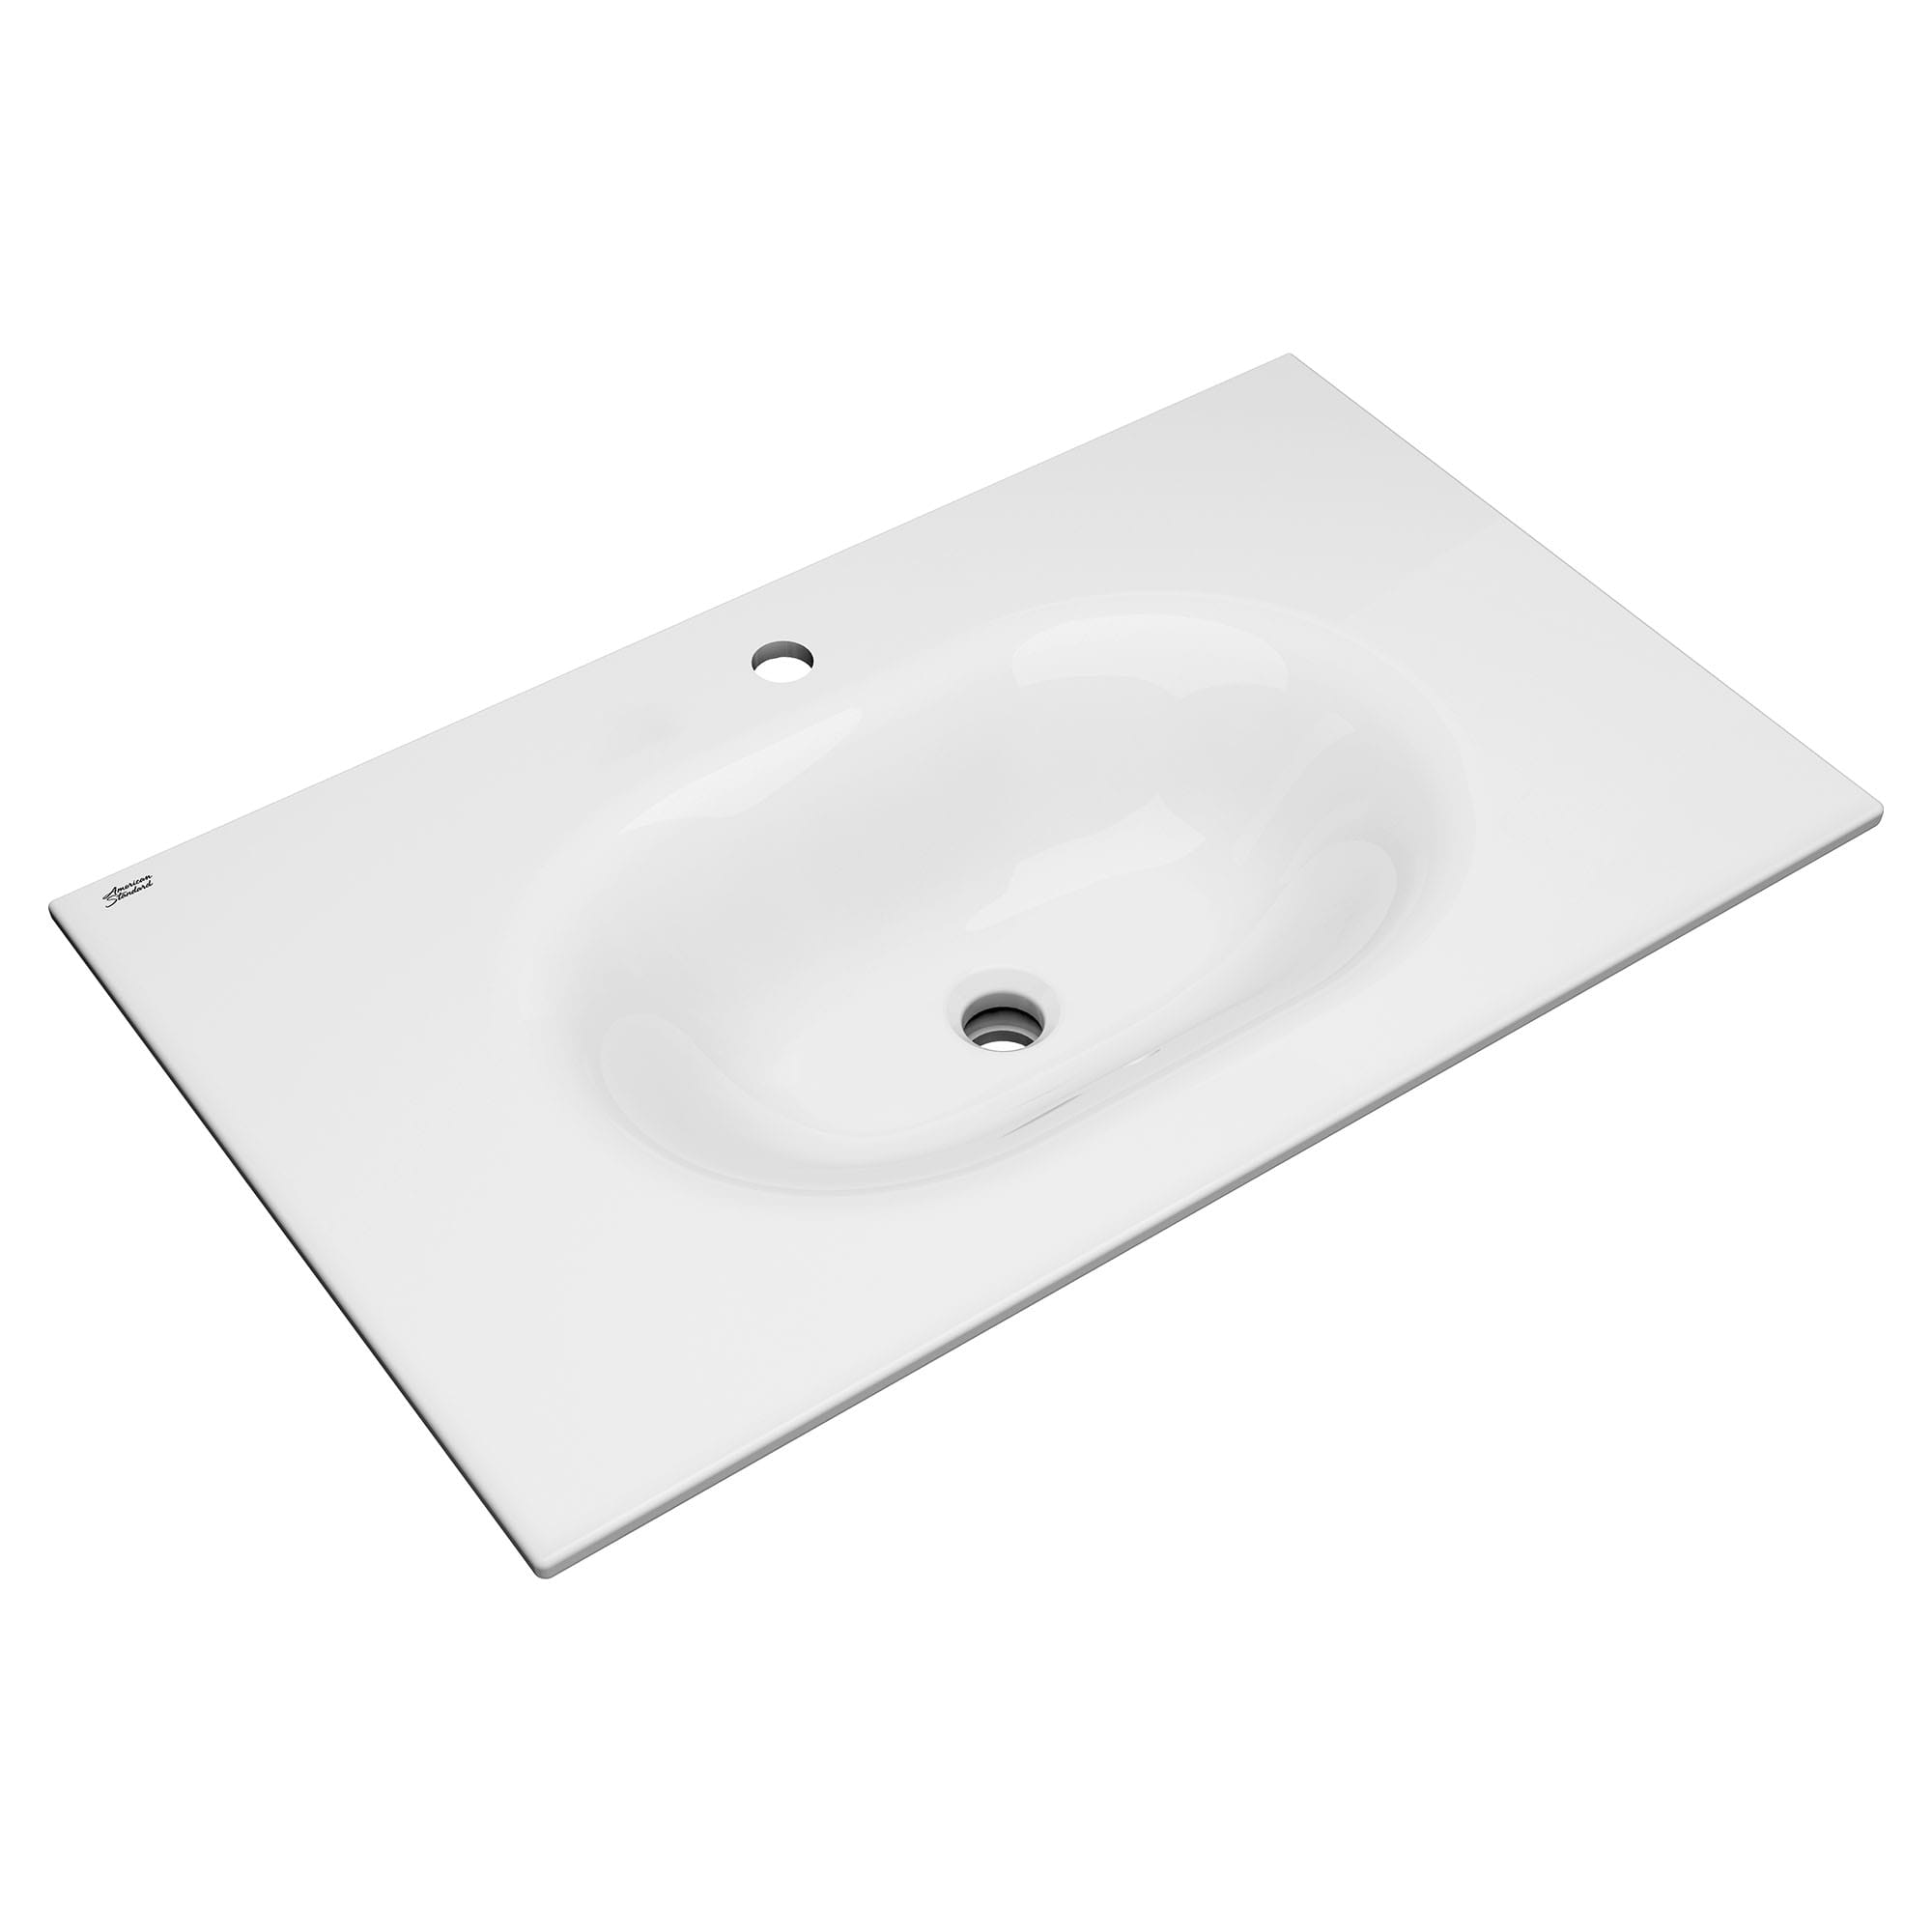 Studio™ S 33-Inch Vitreous China Vanity Sink Top Center Hole Only